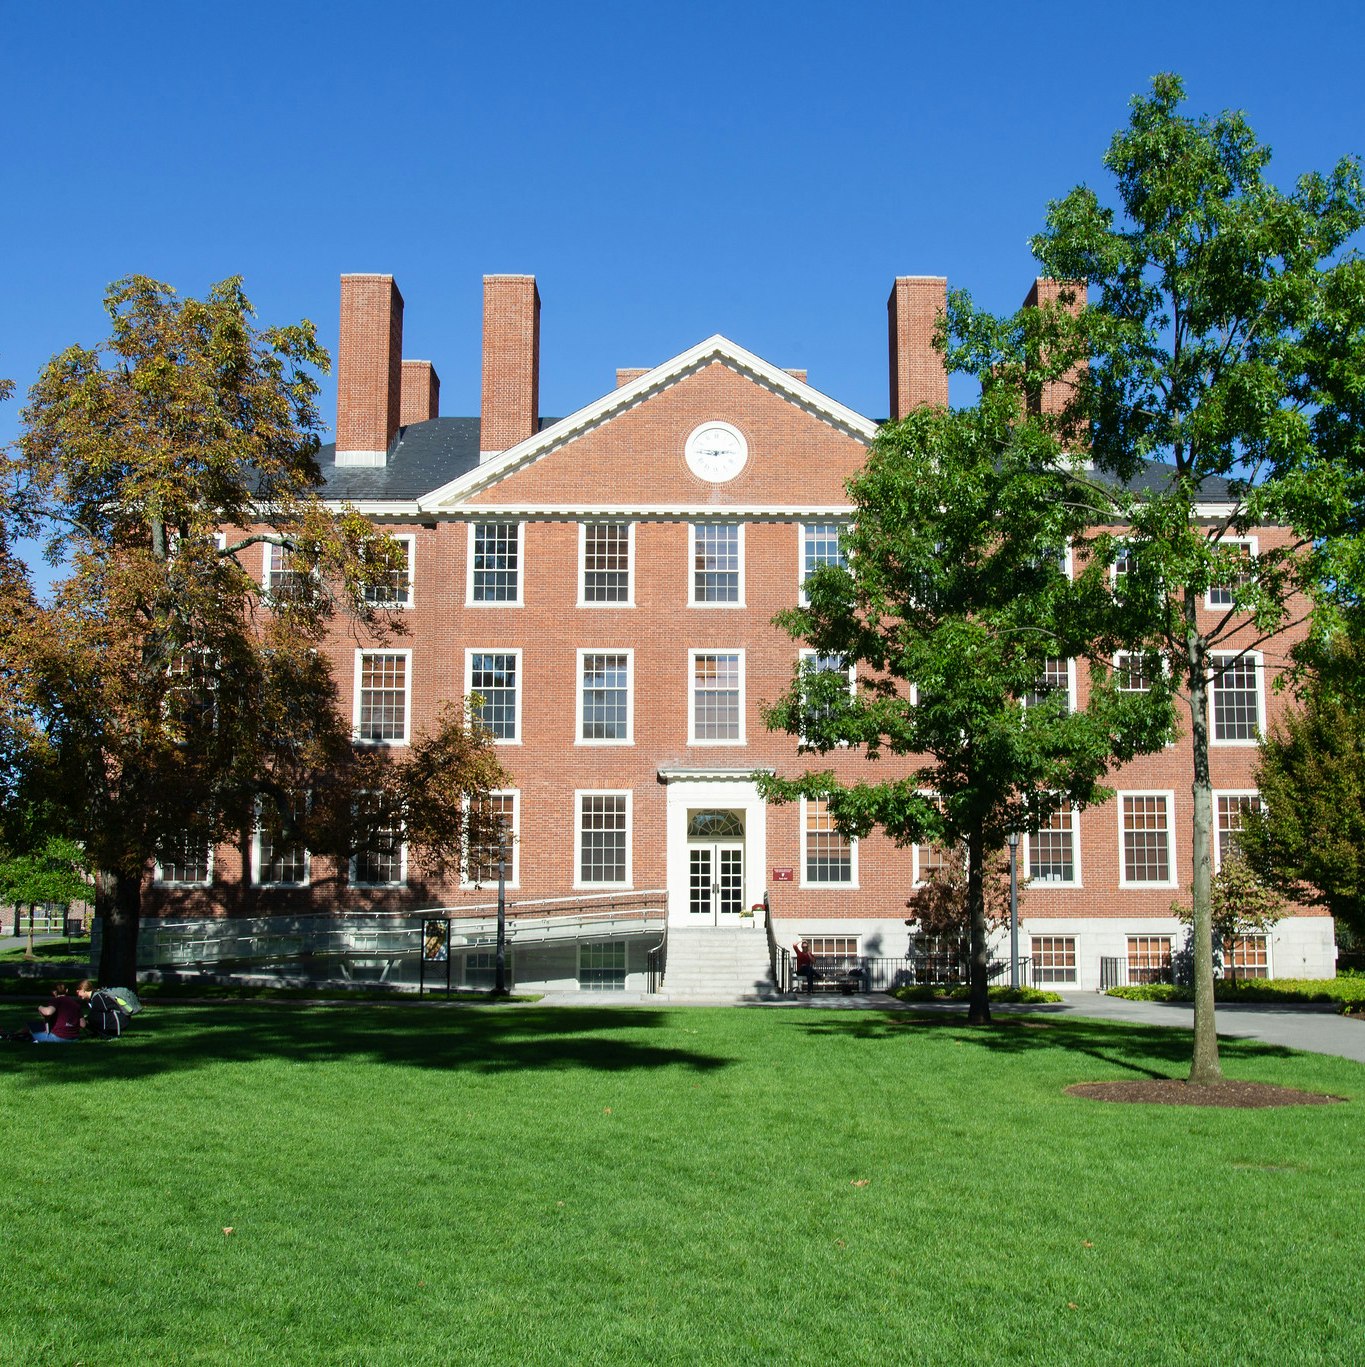 A brick office building with adjacent trees and green grass on a sunny day. The sky is blue.